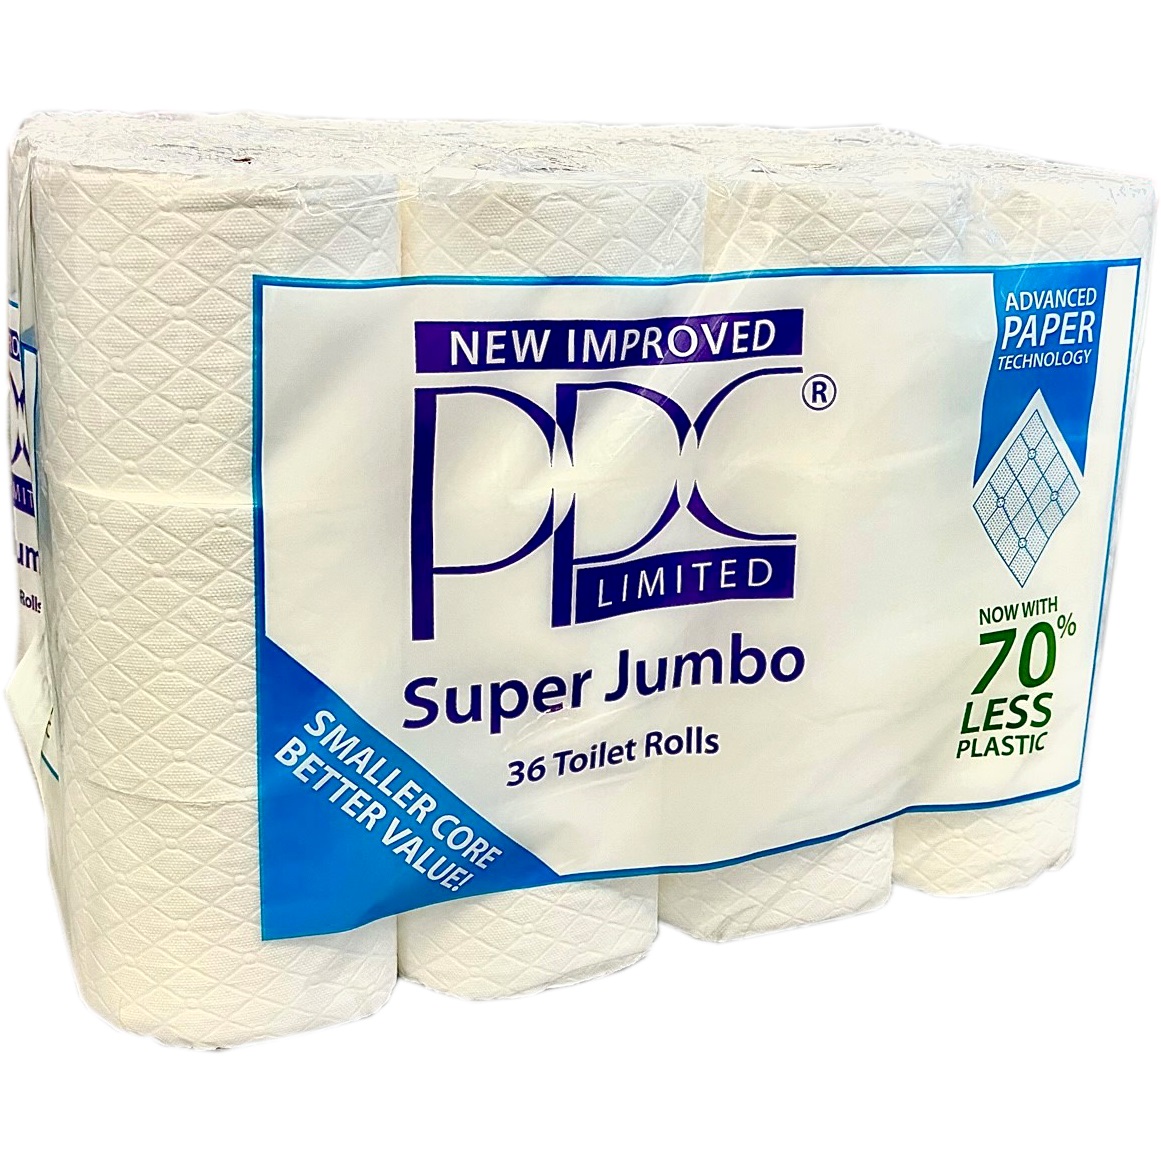 PPC-Super-Jumbo-Toilet-Rolls--36-Rolls-Loose-Packed--2ply-Pure-Tissue--70%25-less-plastic-